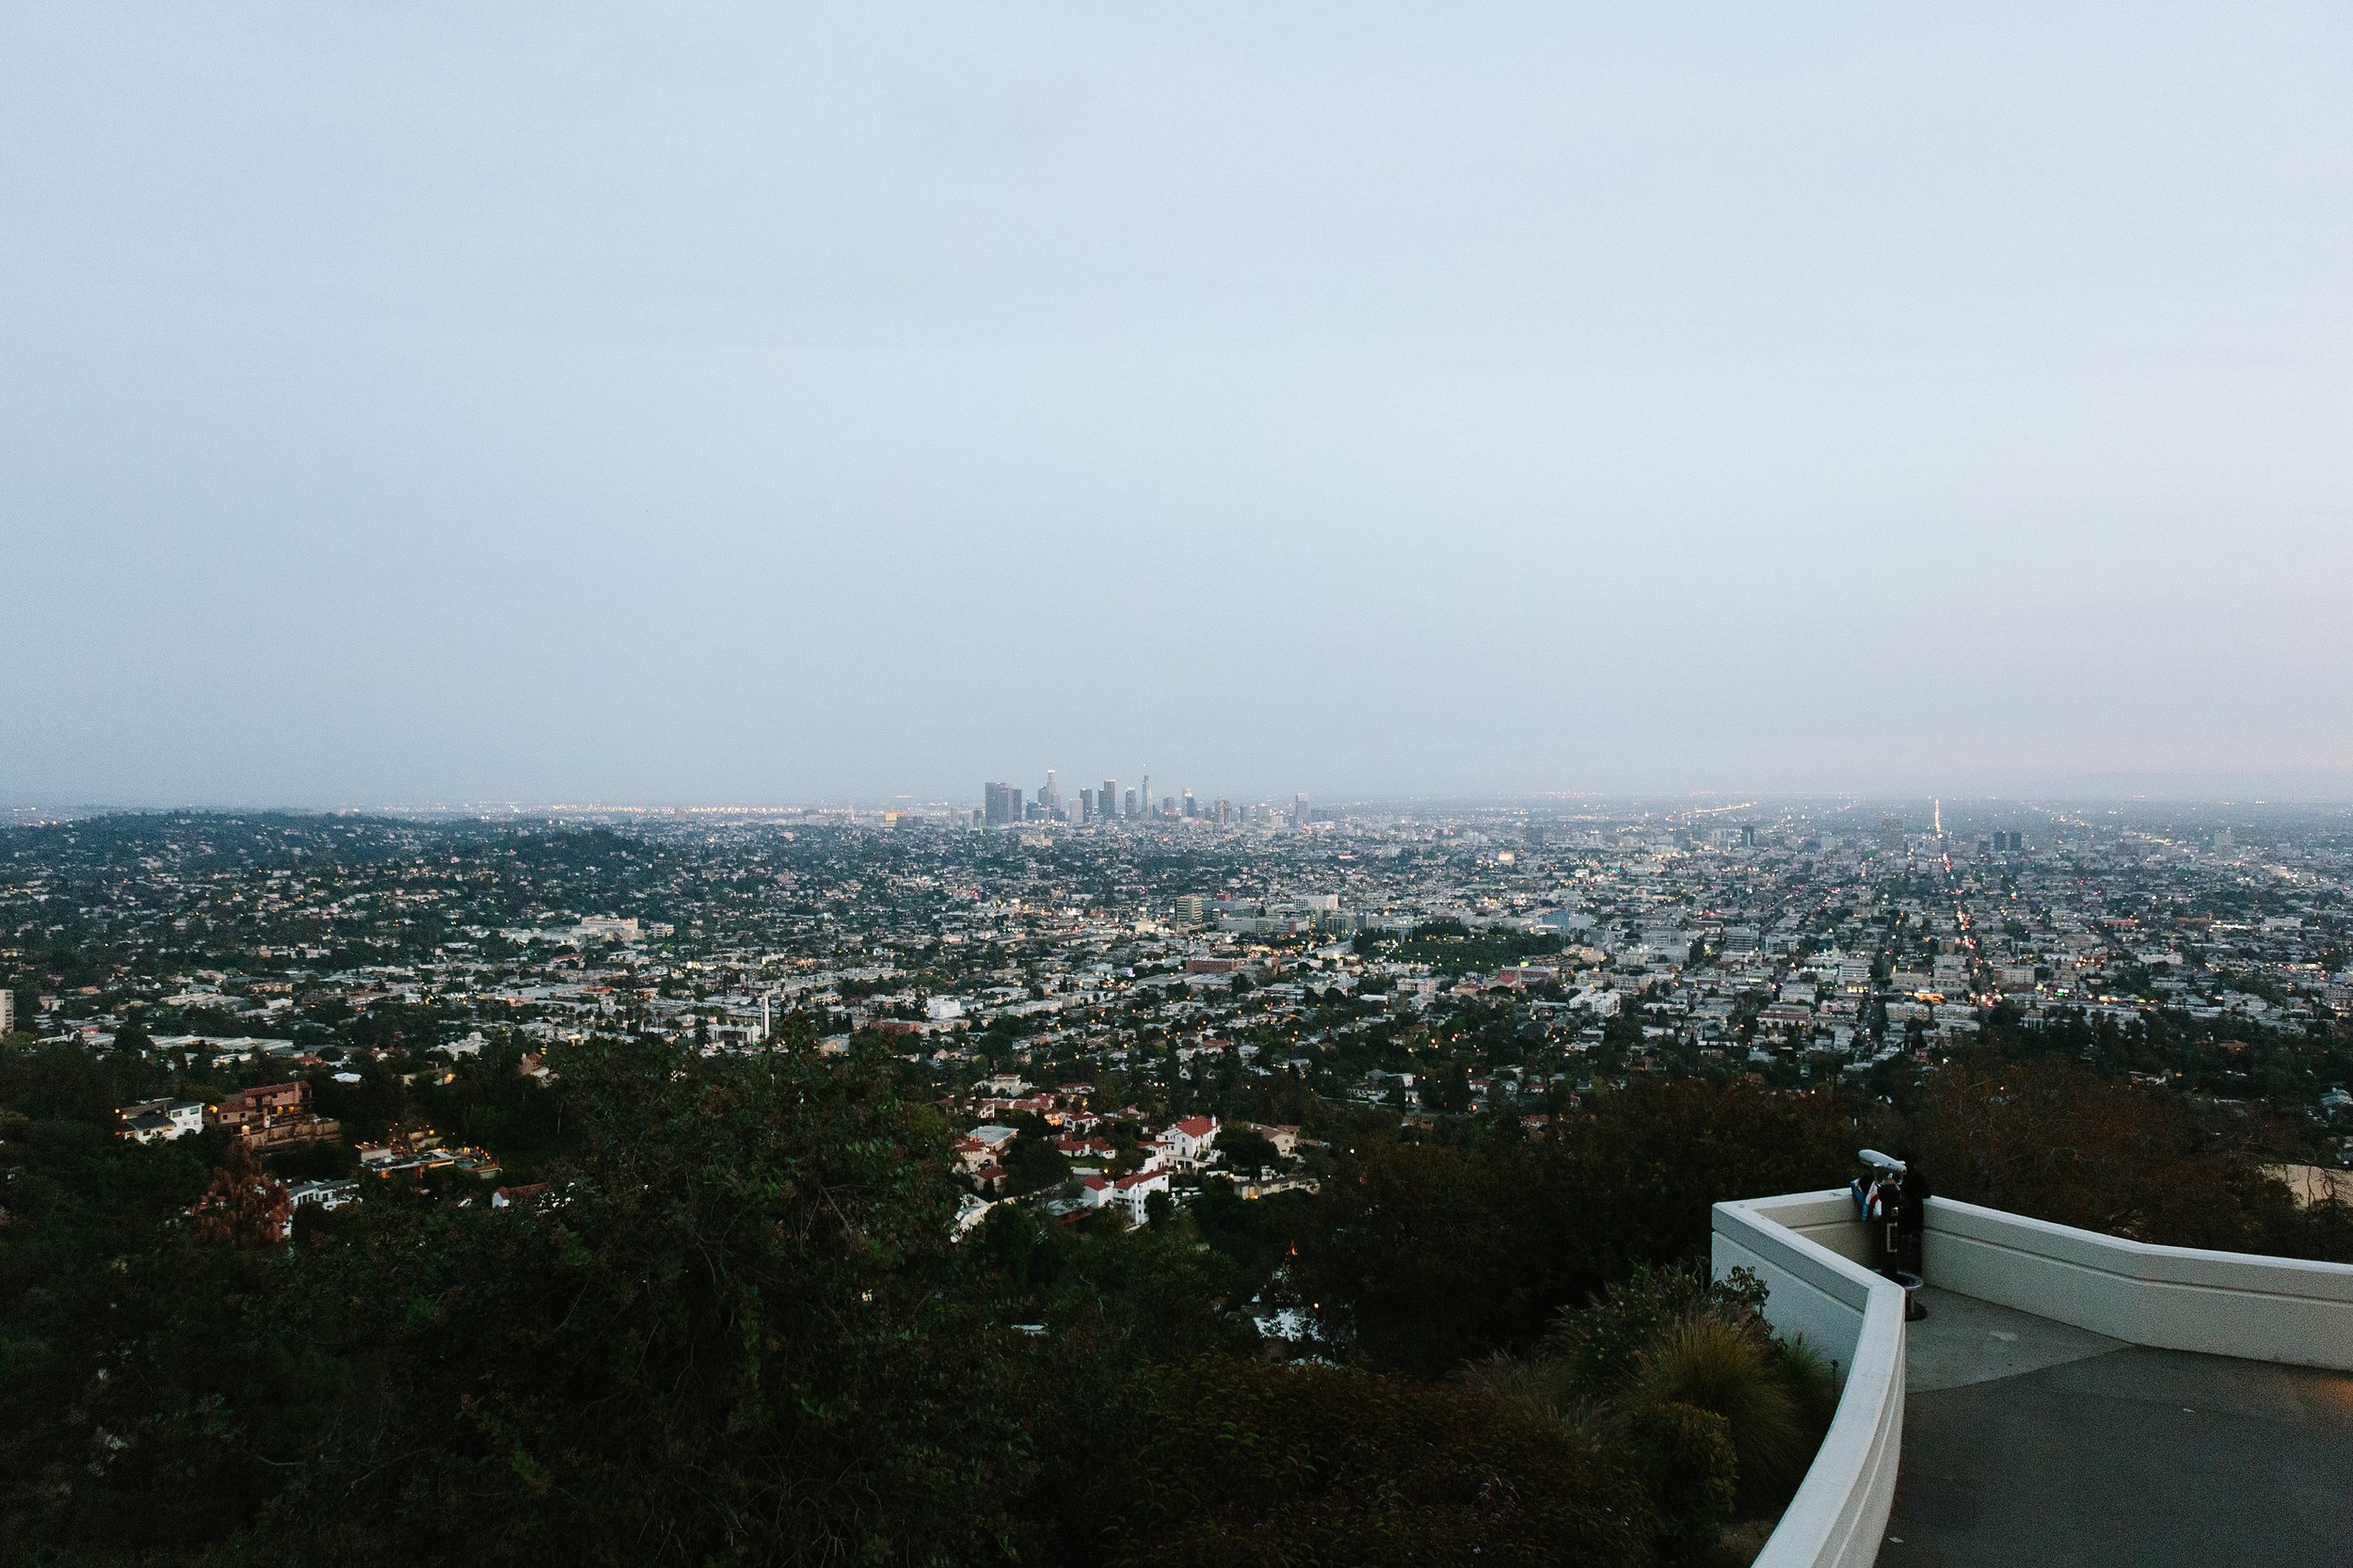  Los Angeles at dusk from Griffith Observatory 